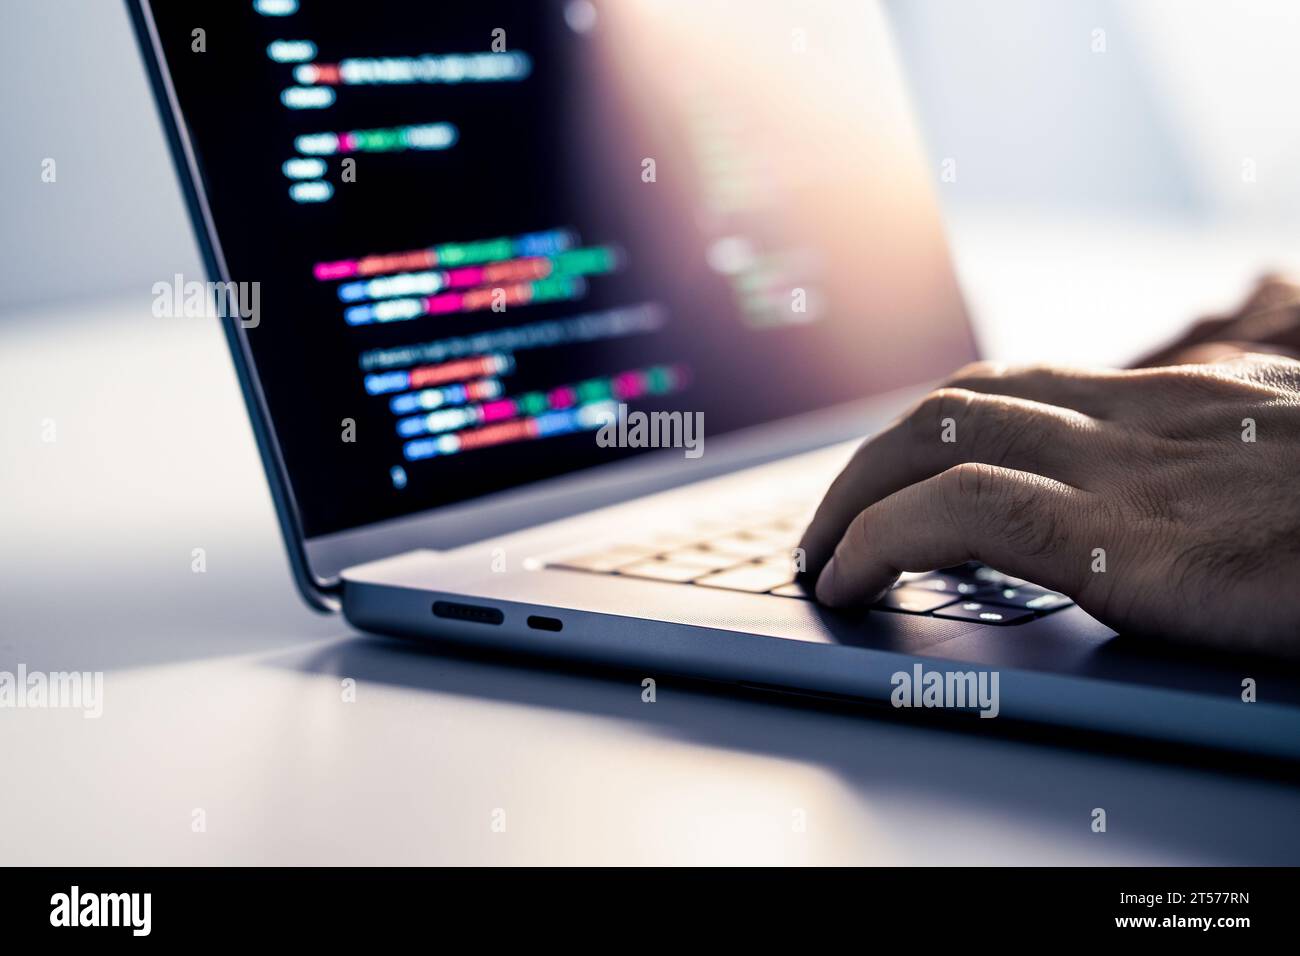 Hacker and malware computer software. Fraud website code in screen. Programmer developing web security with laptop. Data privacy hacking. Stock Photo